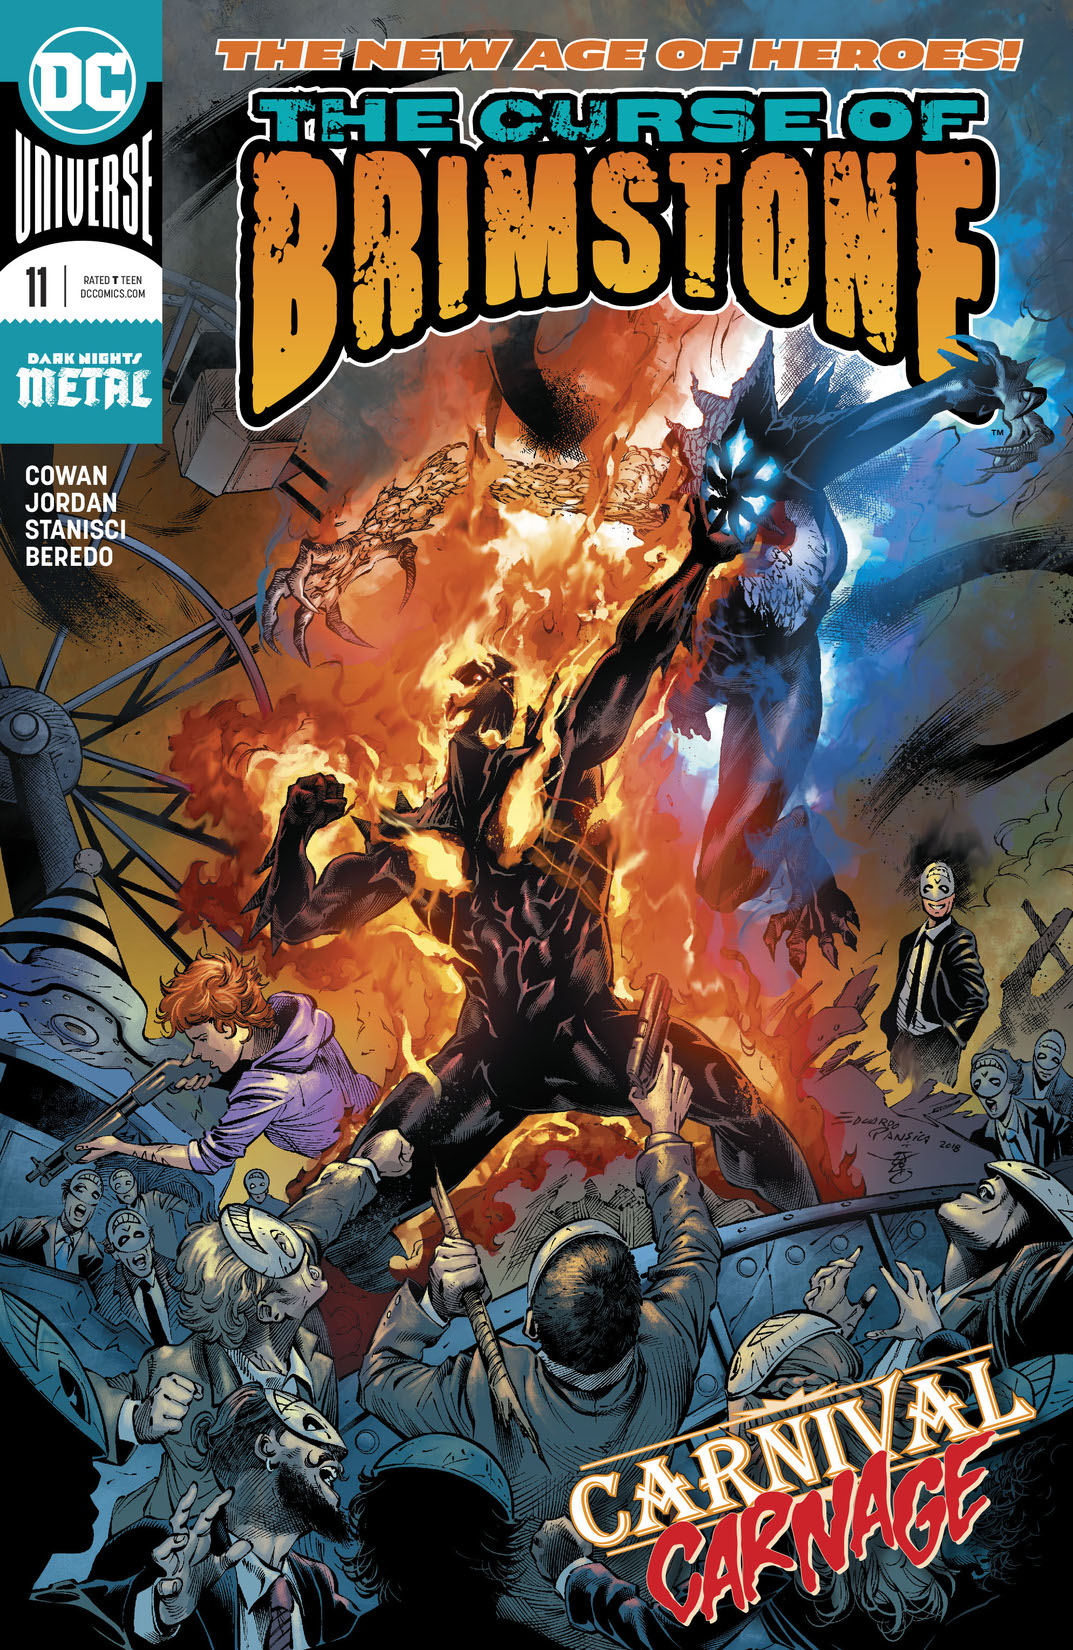 The Curse of Brimstone #11 preview images